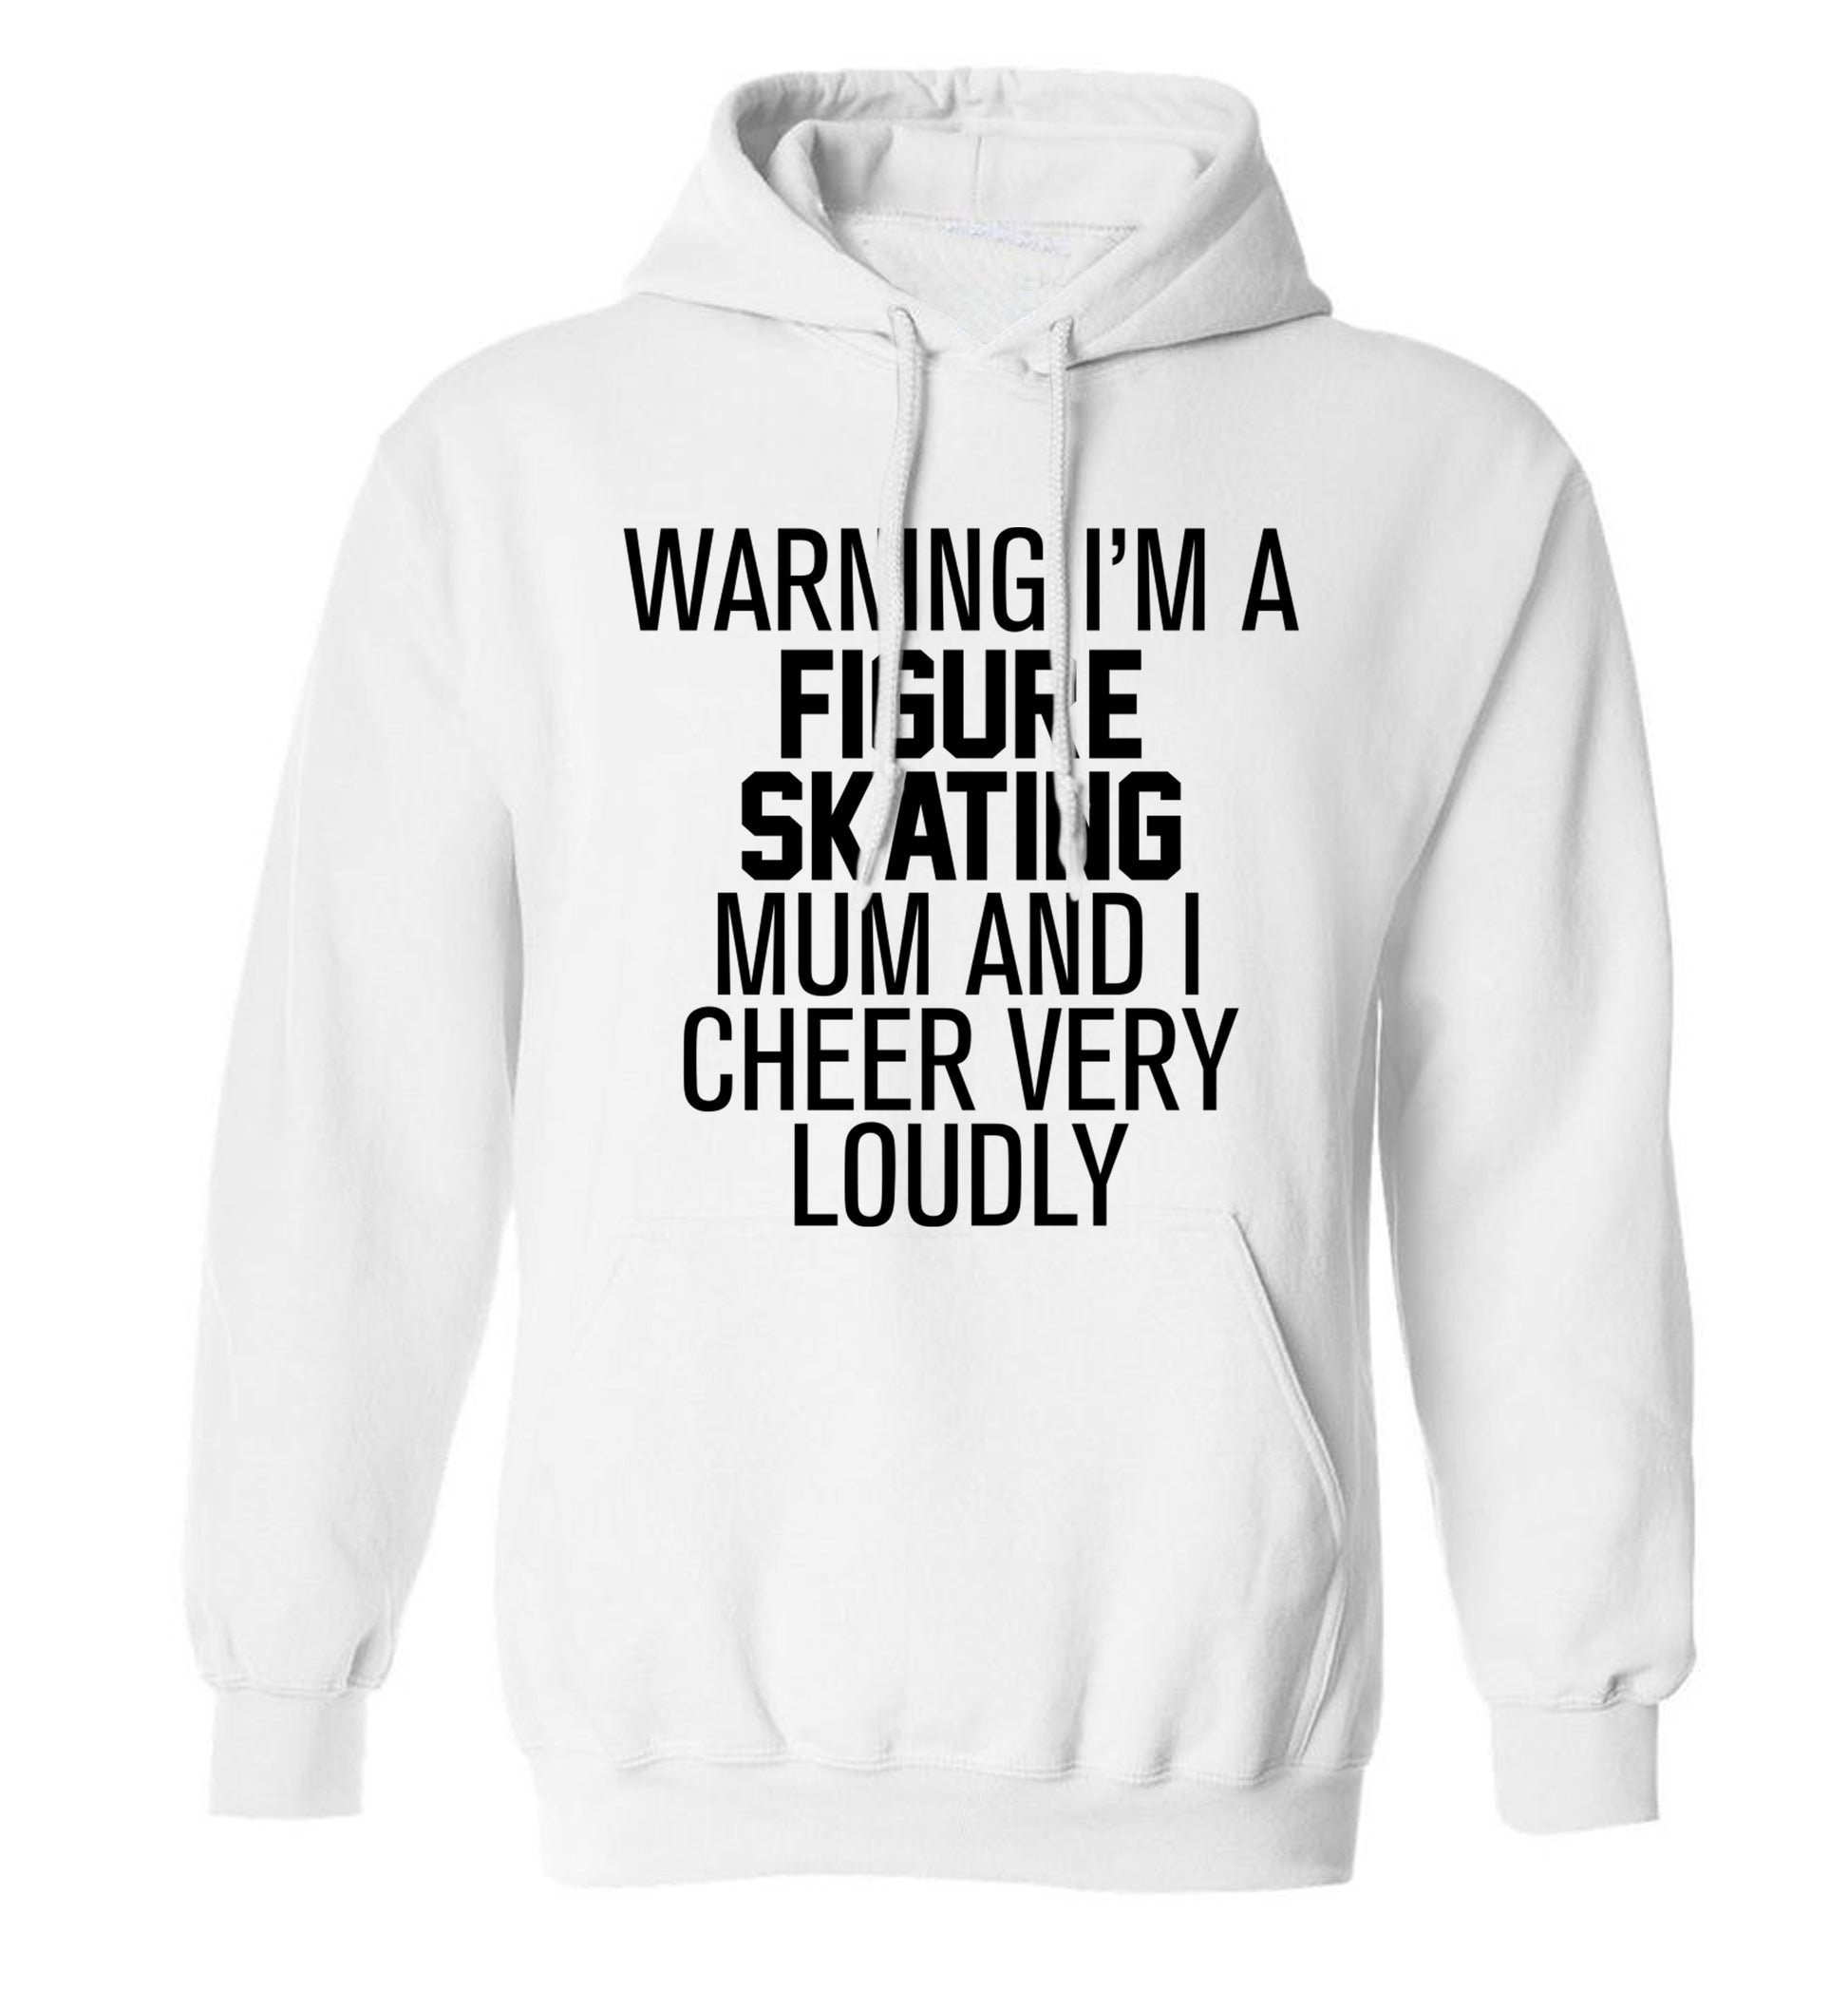 Warning I'm a figure skating mum and I cheer very loudly adults unisexwhite hoodie 2XL